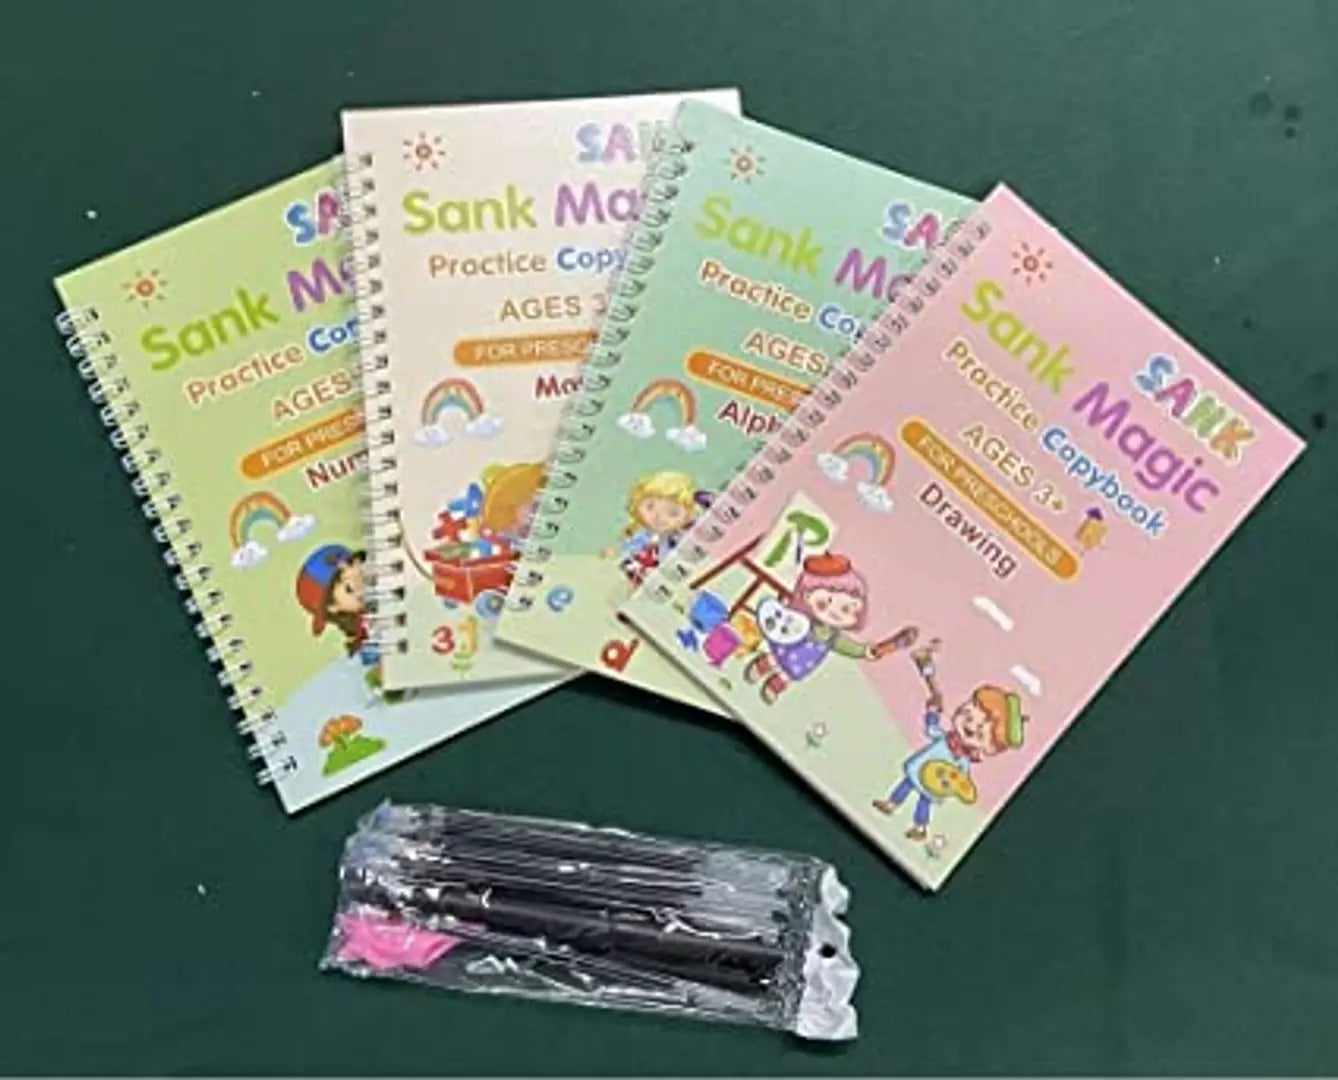 Sank Magic Practice Copybook, Number Tracing Book for Preschoolers with Pen, Magic Calligraphy Copybook Set Practical Reusable Writing Tool Simple Hand Lettering (4 BOOK + 10 REFILL+ 2 Pen +2 Grip)